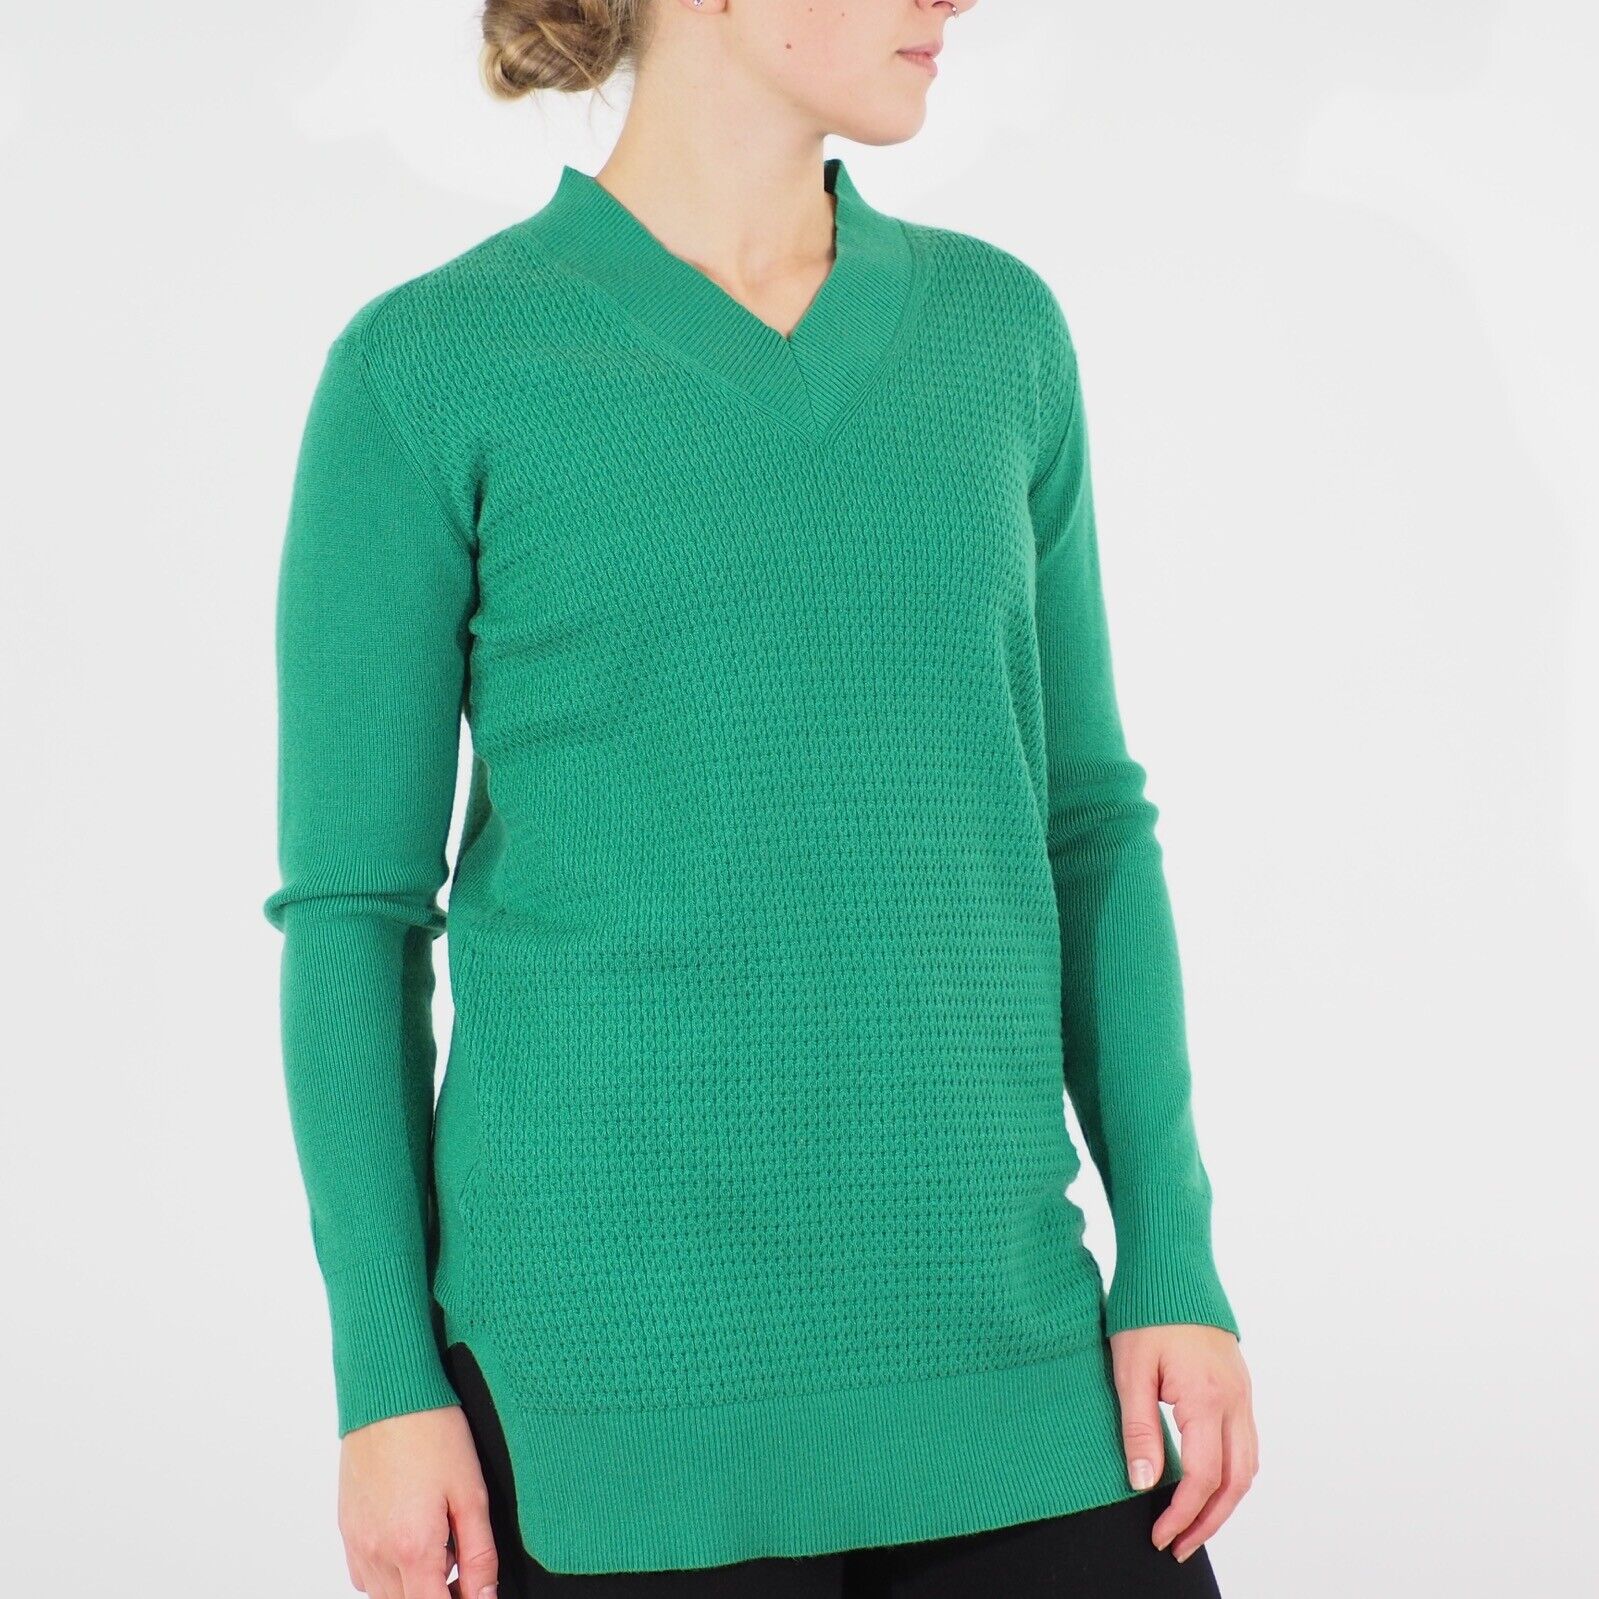 Womens Ex M&S Long Sleeve Top Green V Neck Ladies Casual Stretch Viscose Jumper